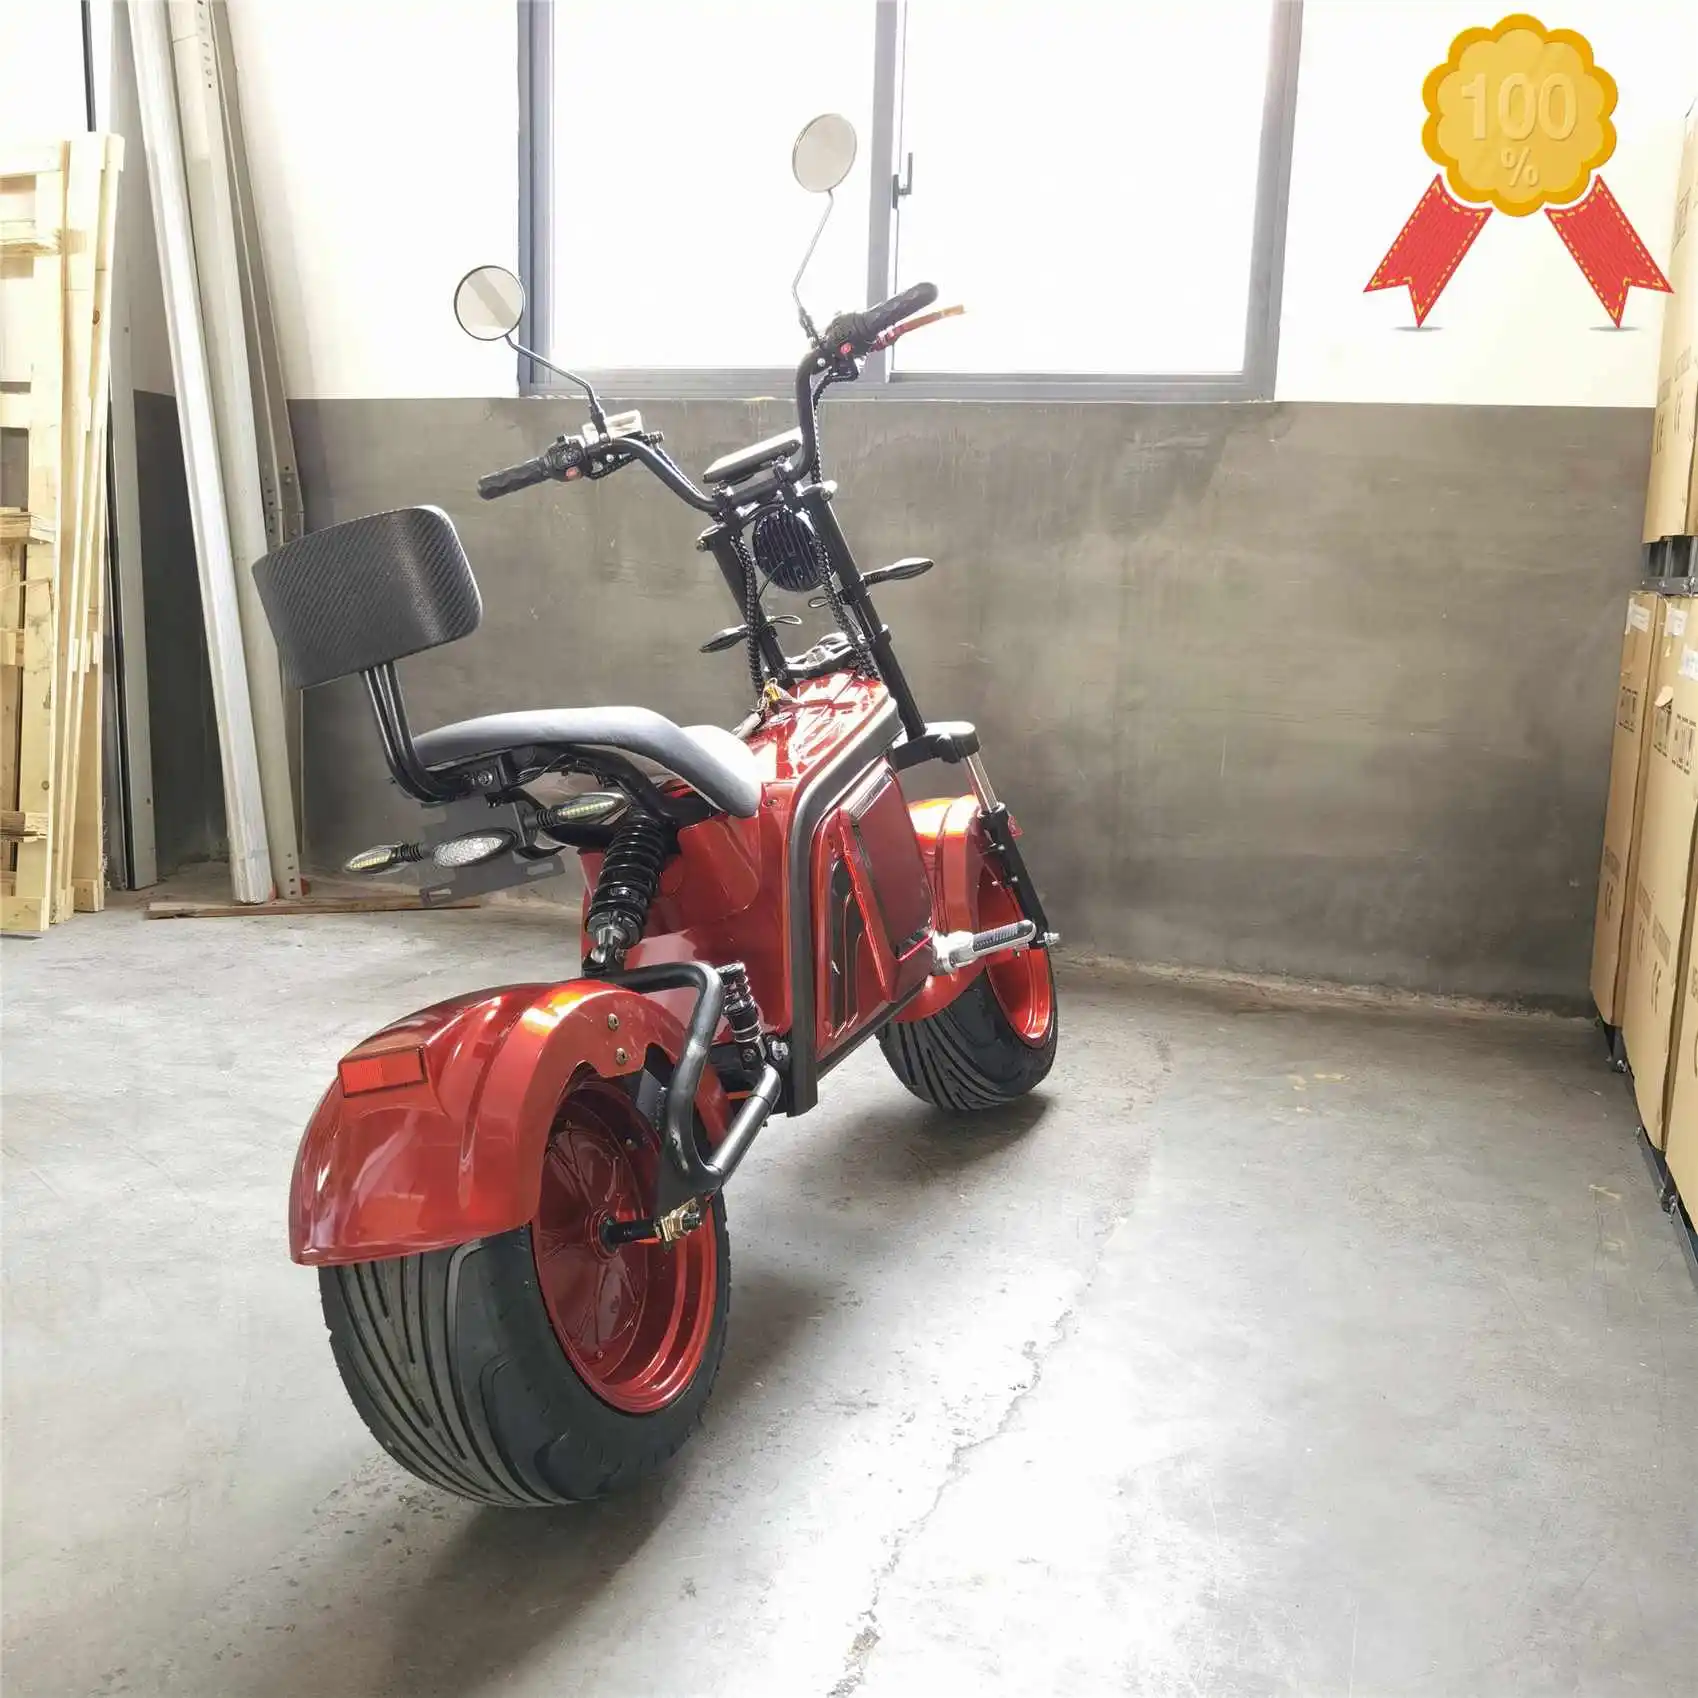 

New Products Moped 3000W 72V Electric Motorcycle With USB Port